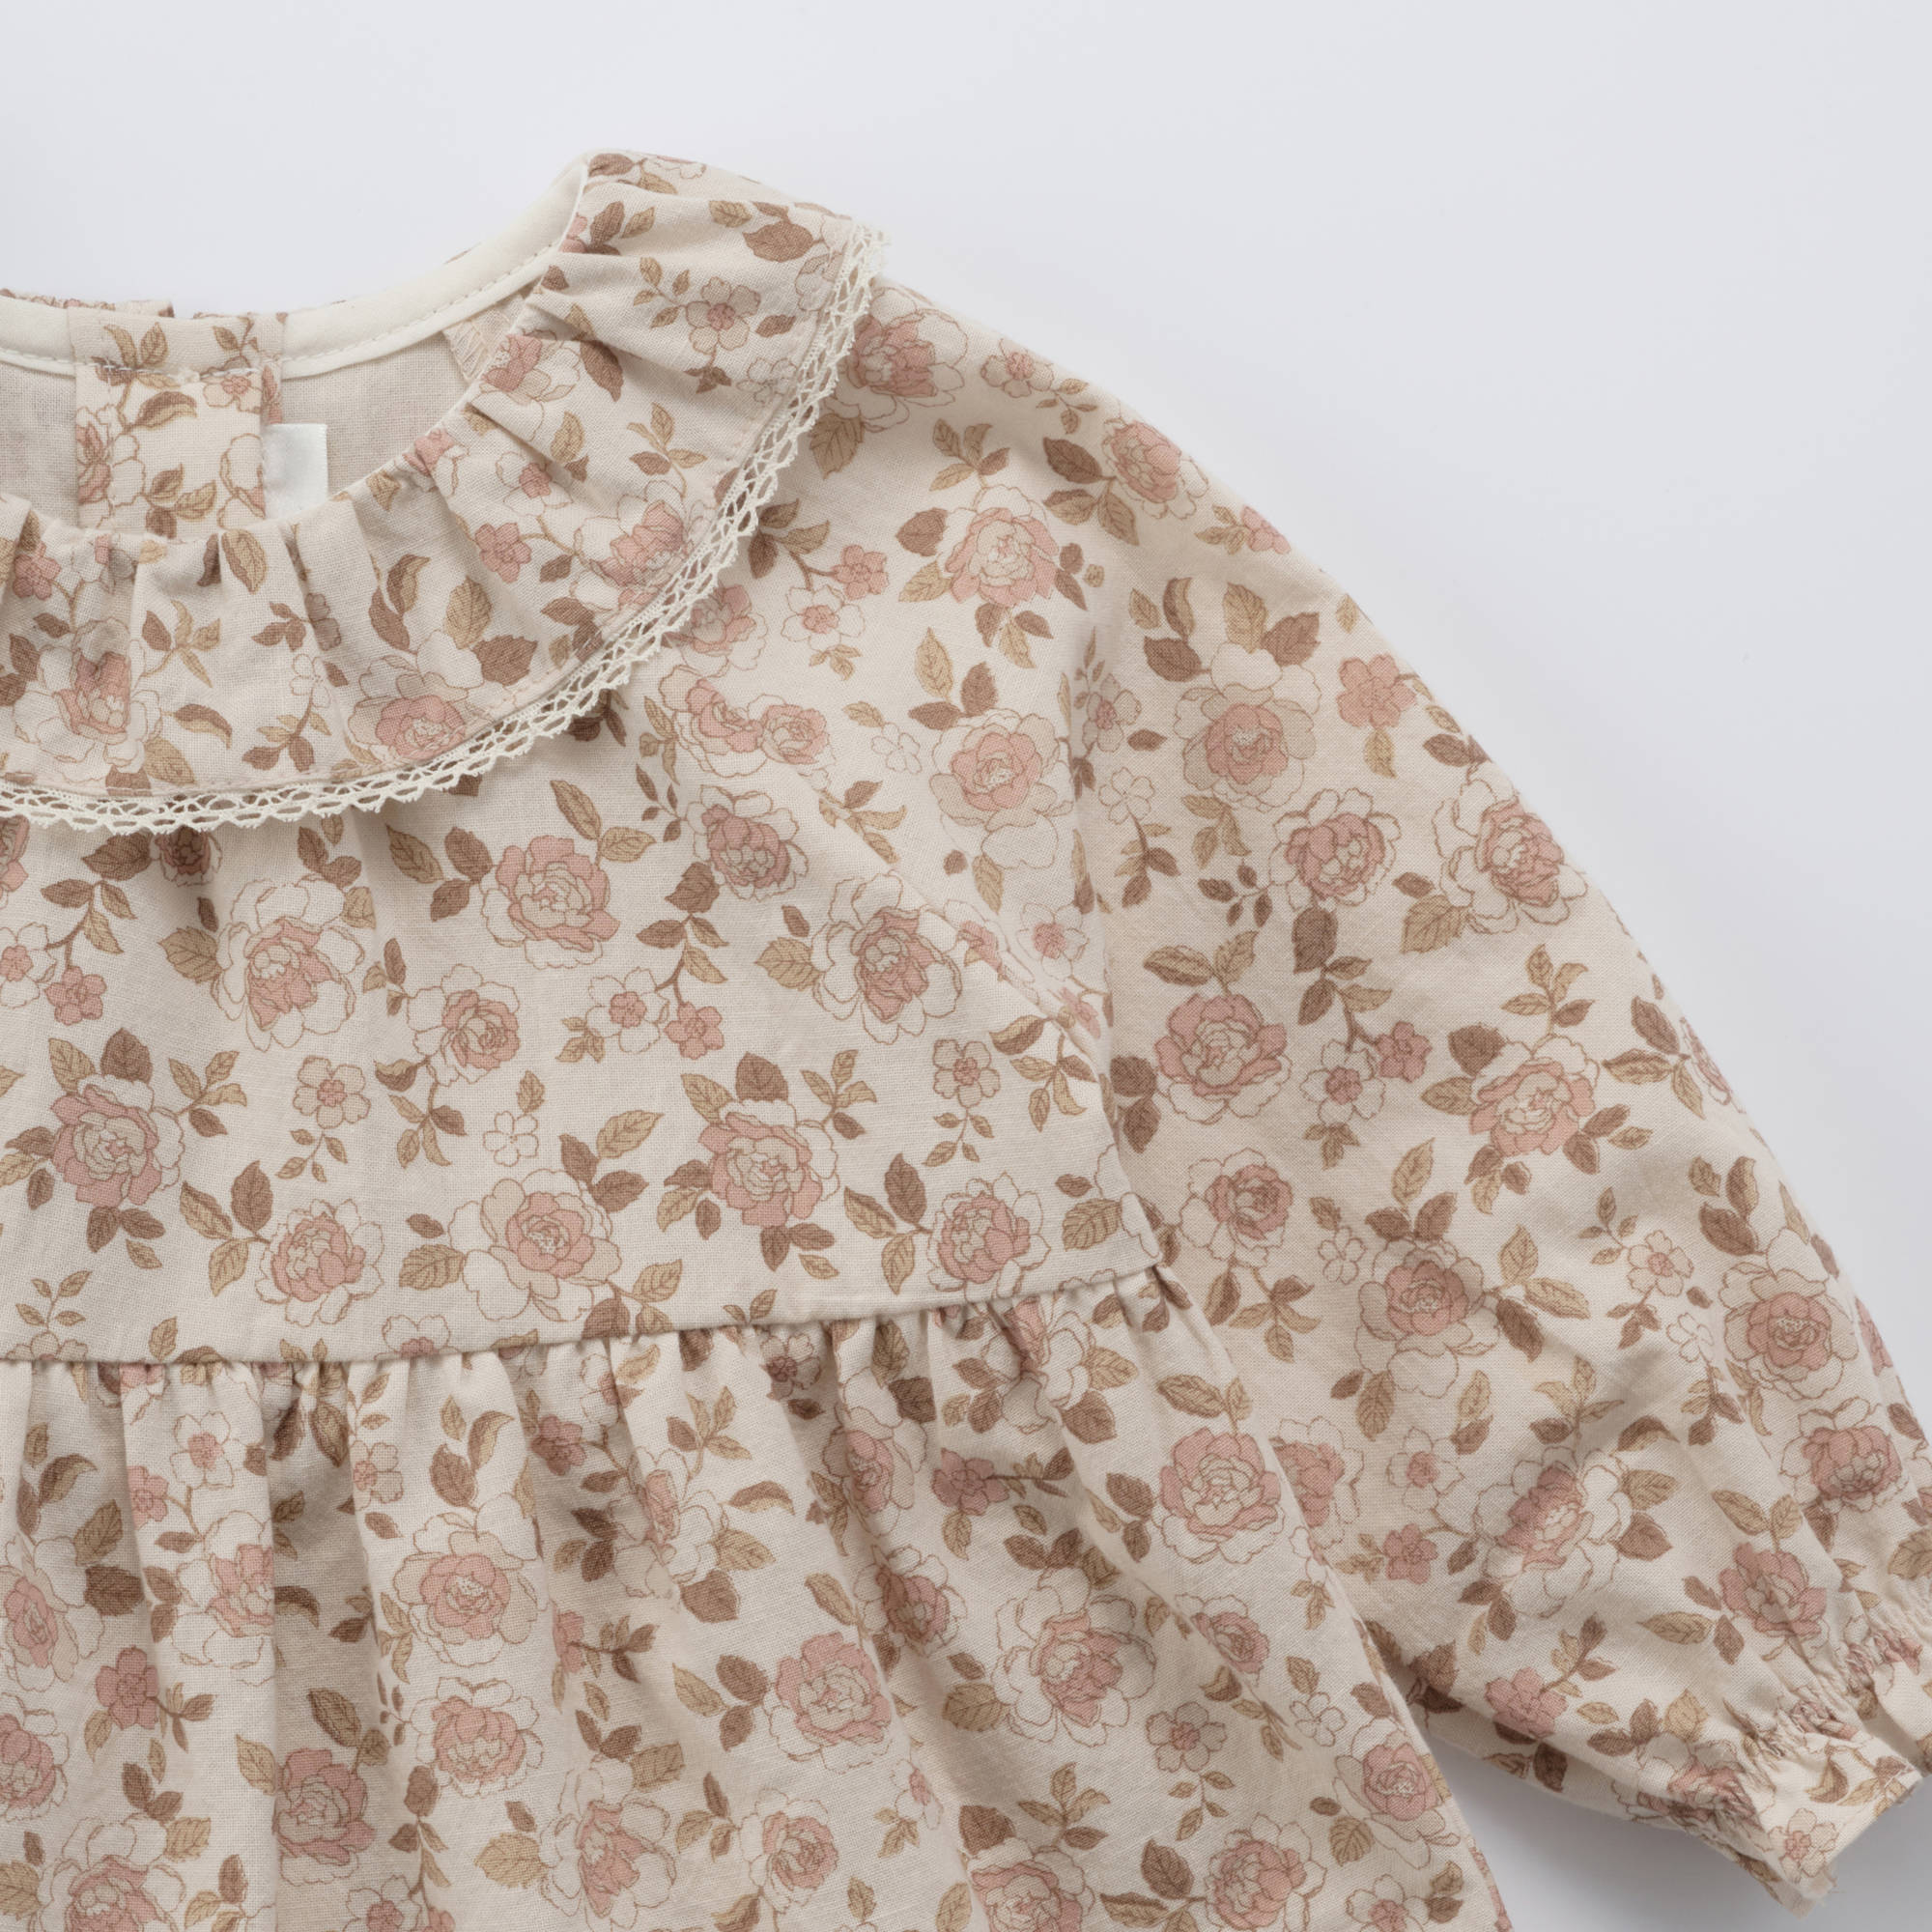 Baby Girls Pink Floral Cotton Top